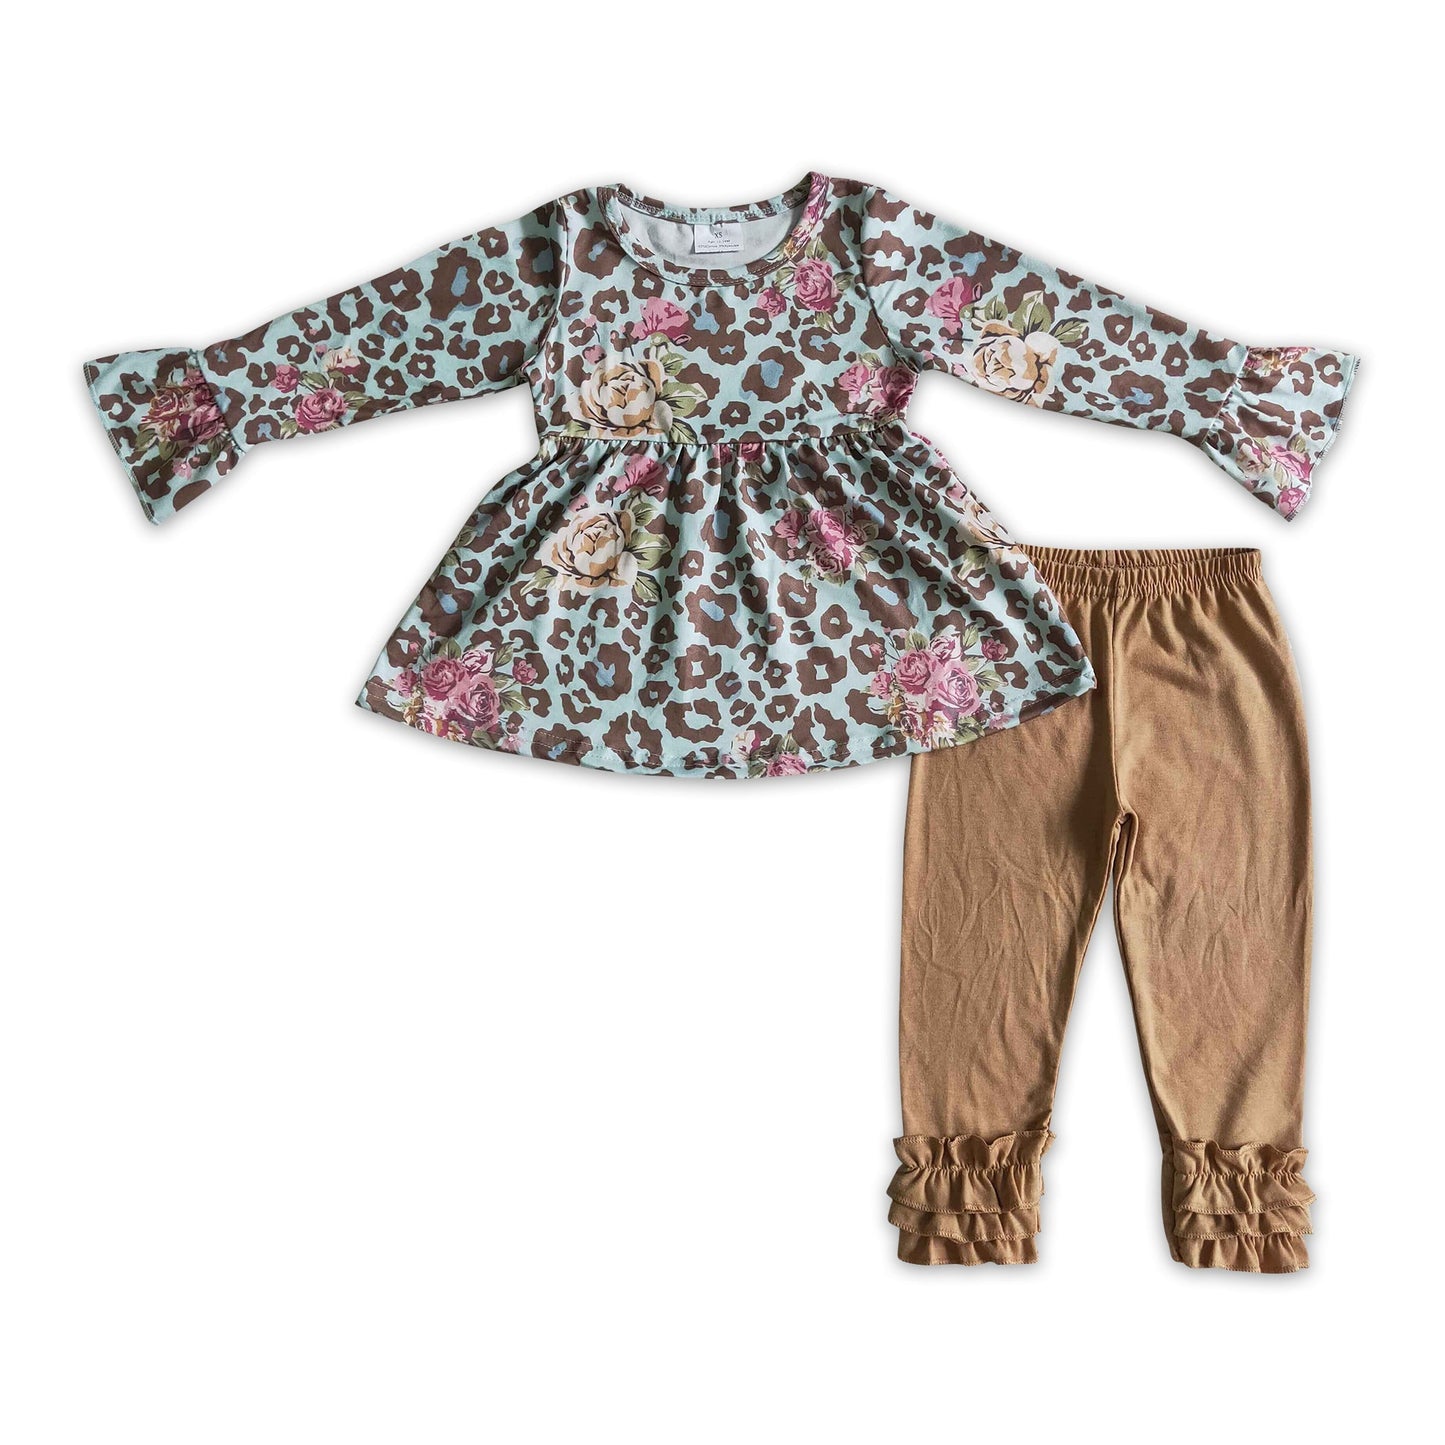 Leopard floral tunic leggings girls fall outfits